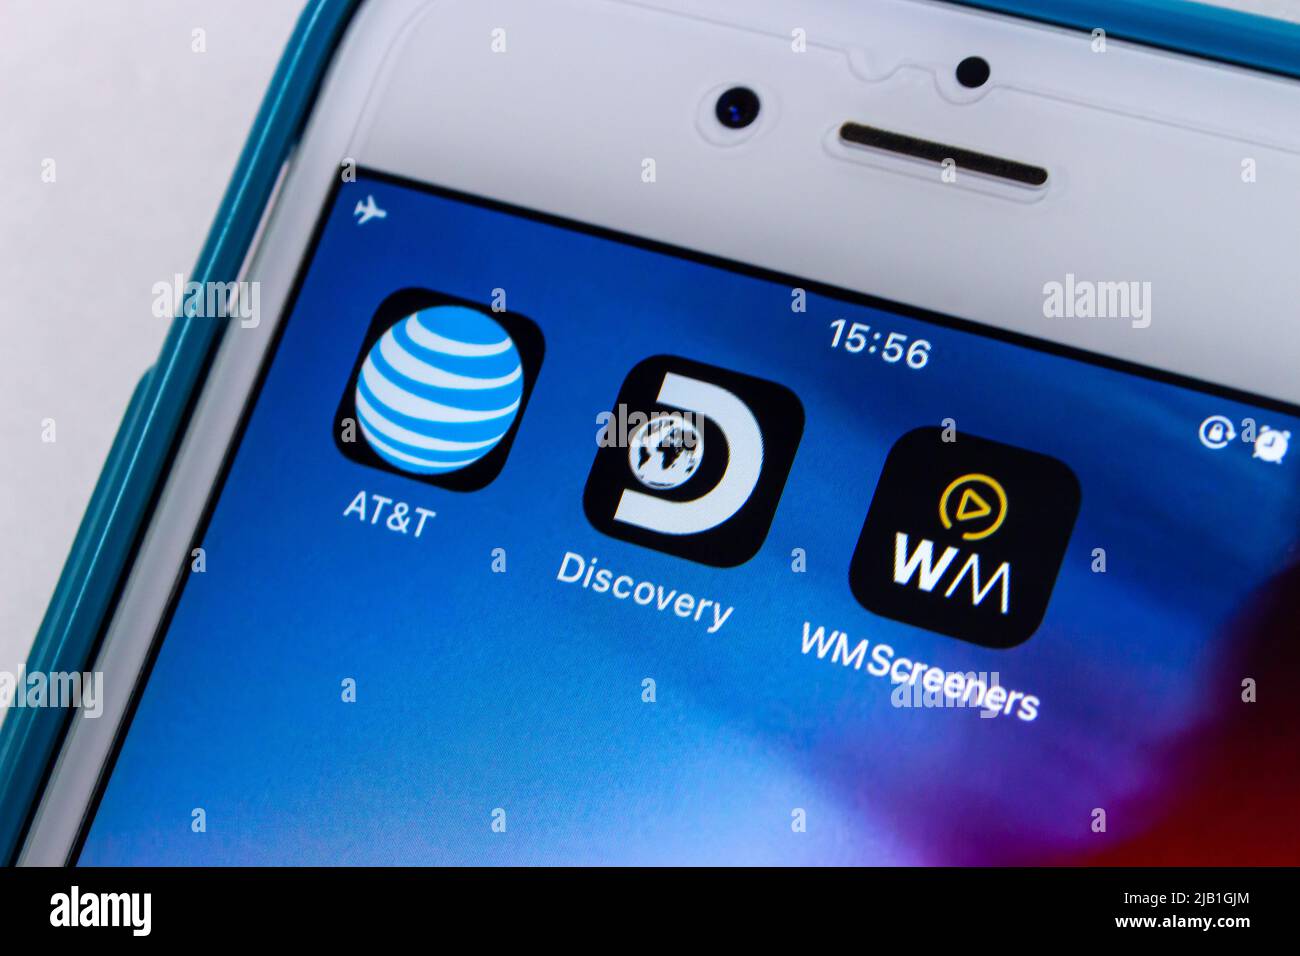 Kumamoto, JAPAN - Jun 1 2021 : AT&T, Discovery & WarnerMedia on iPhone. AT&T announced that spinning off its WM and merging it with Discovery, Inc Stock Photo